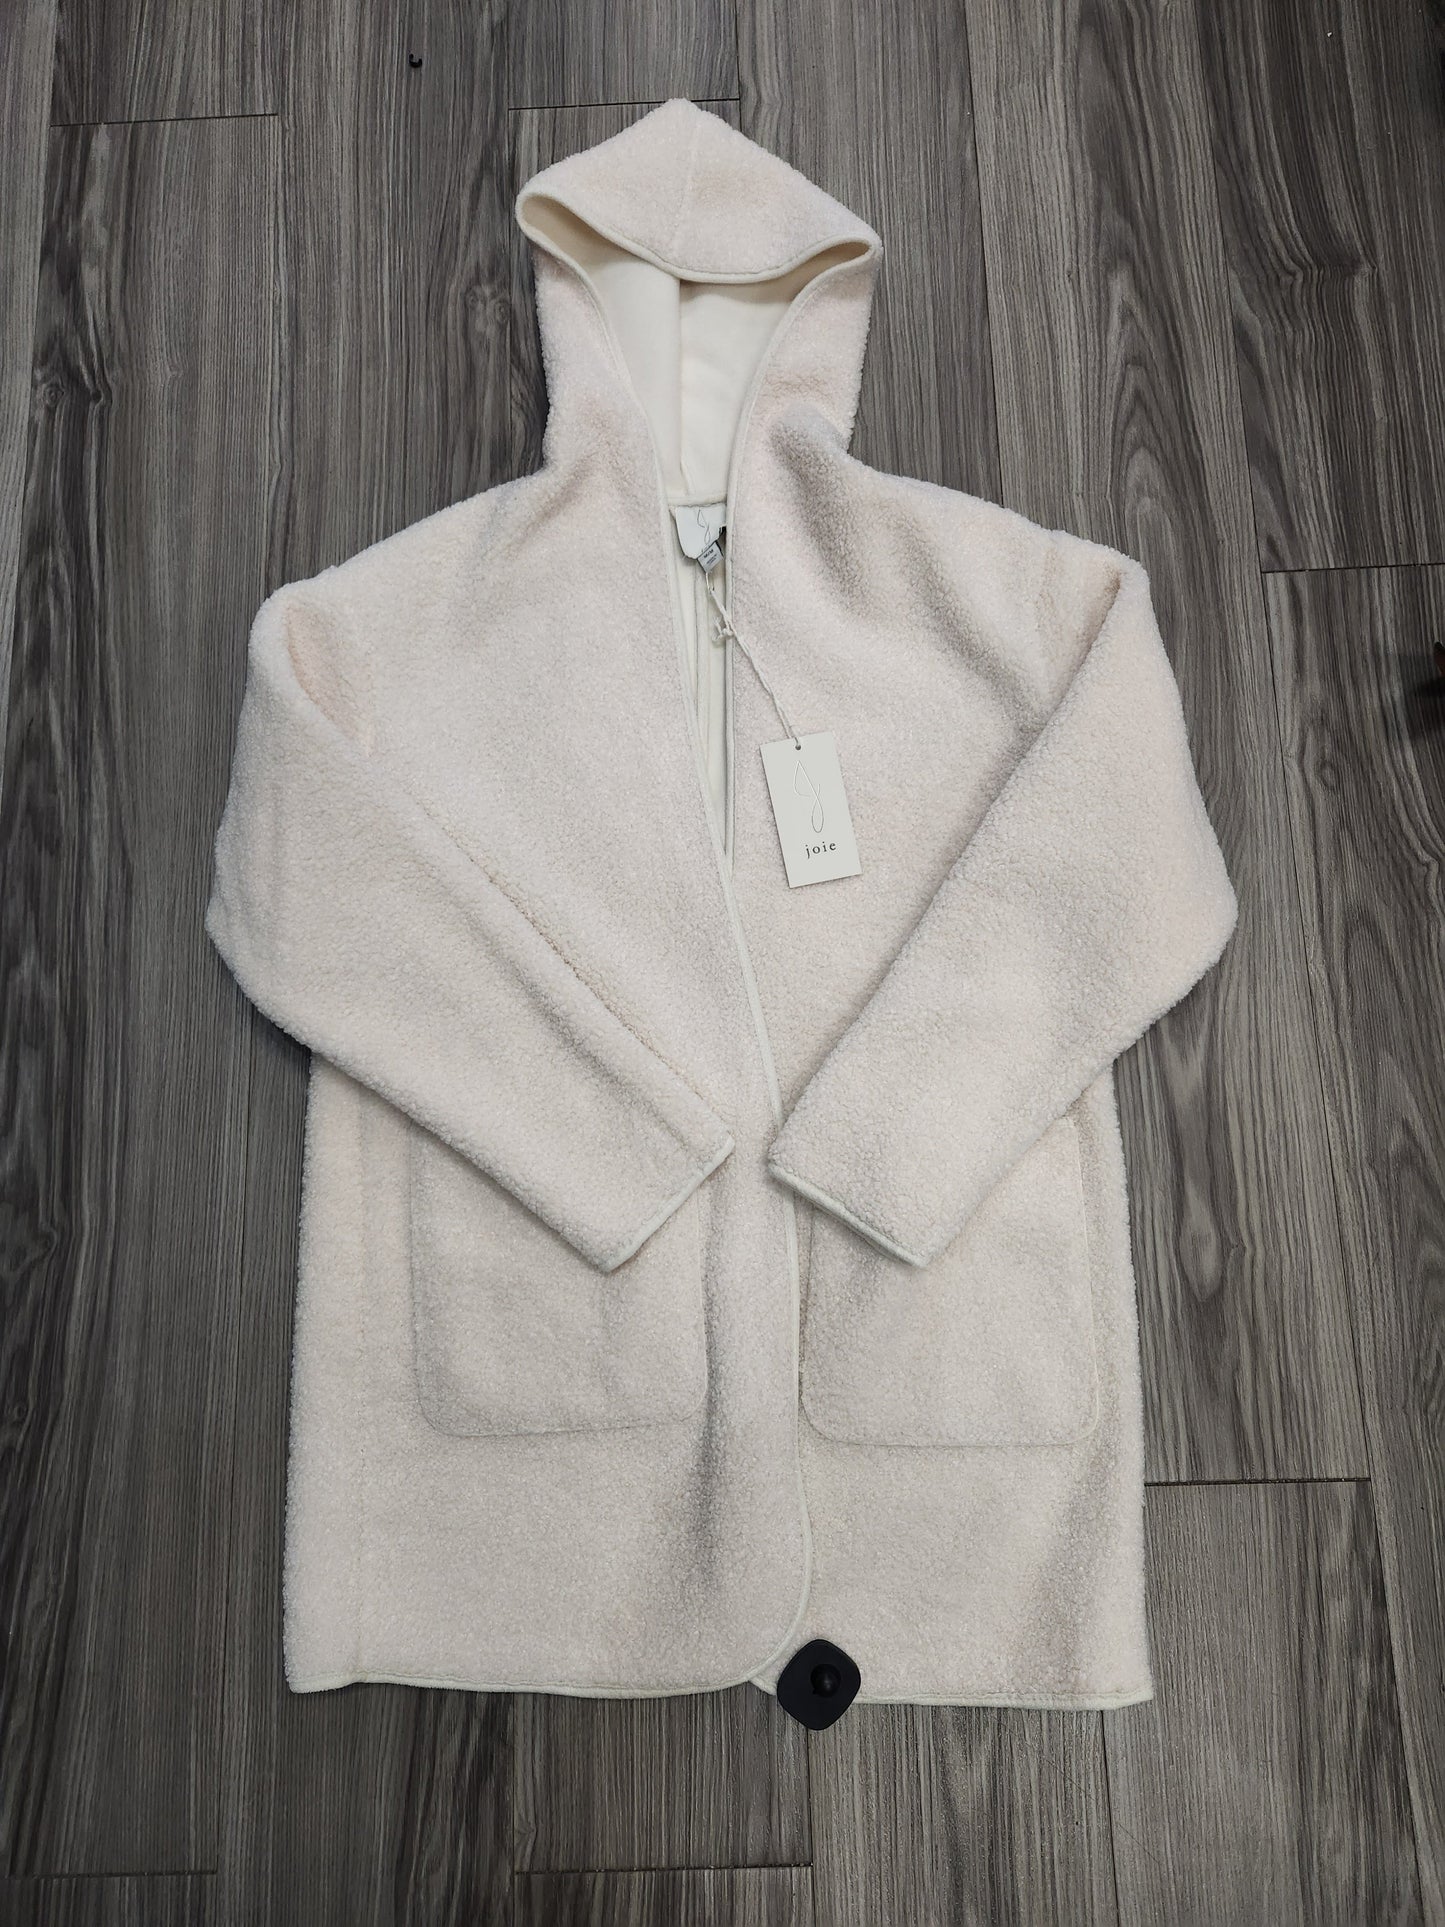 Cardigan By Joie  Size: M